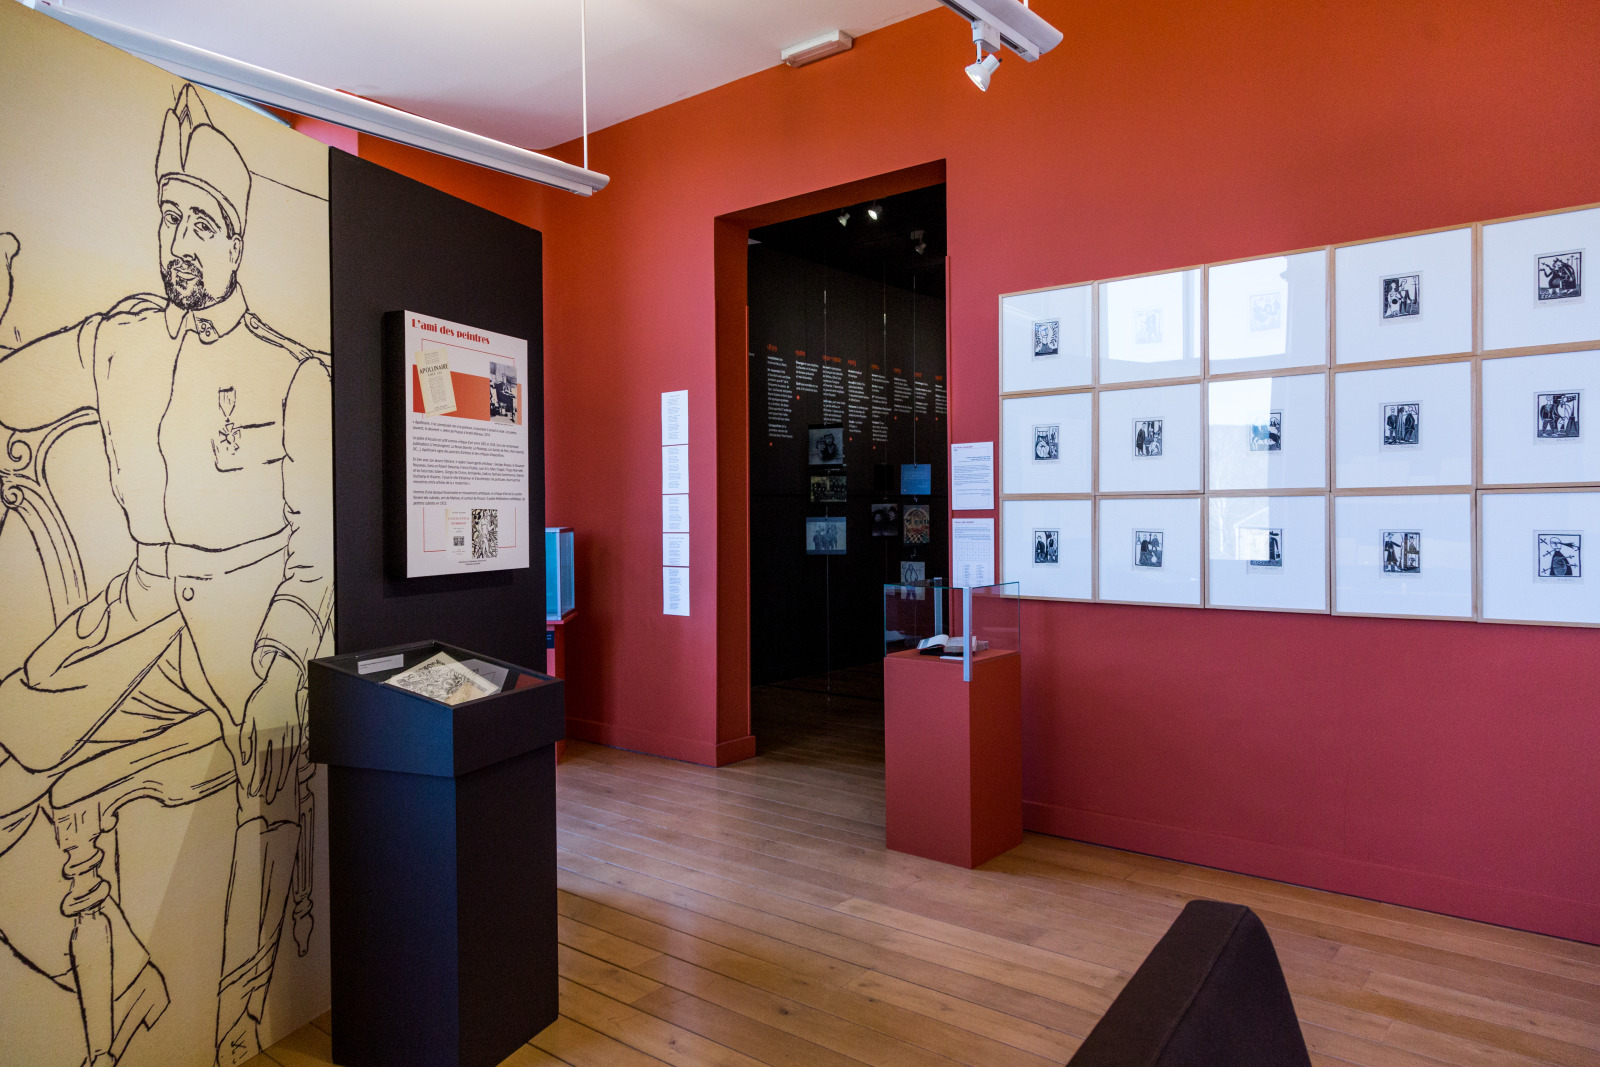 Exhibition room with drawings and illustrations